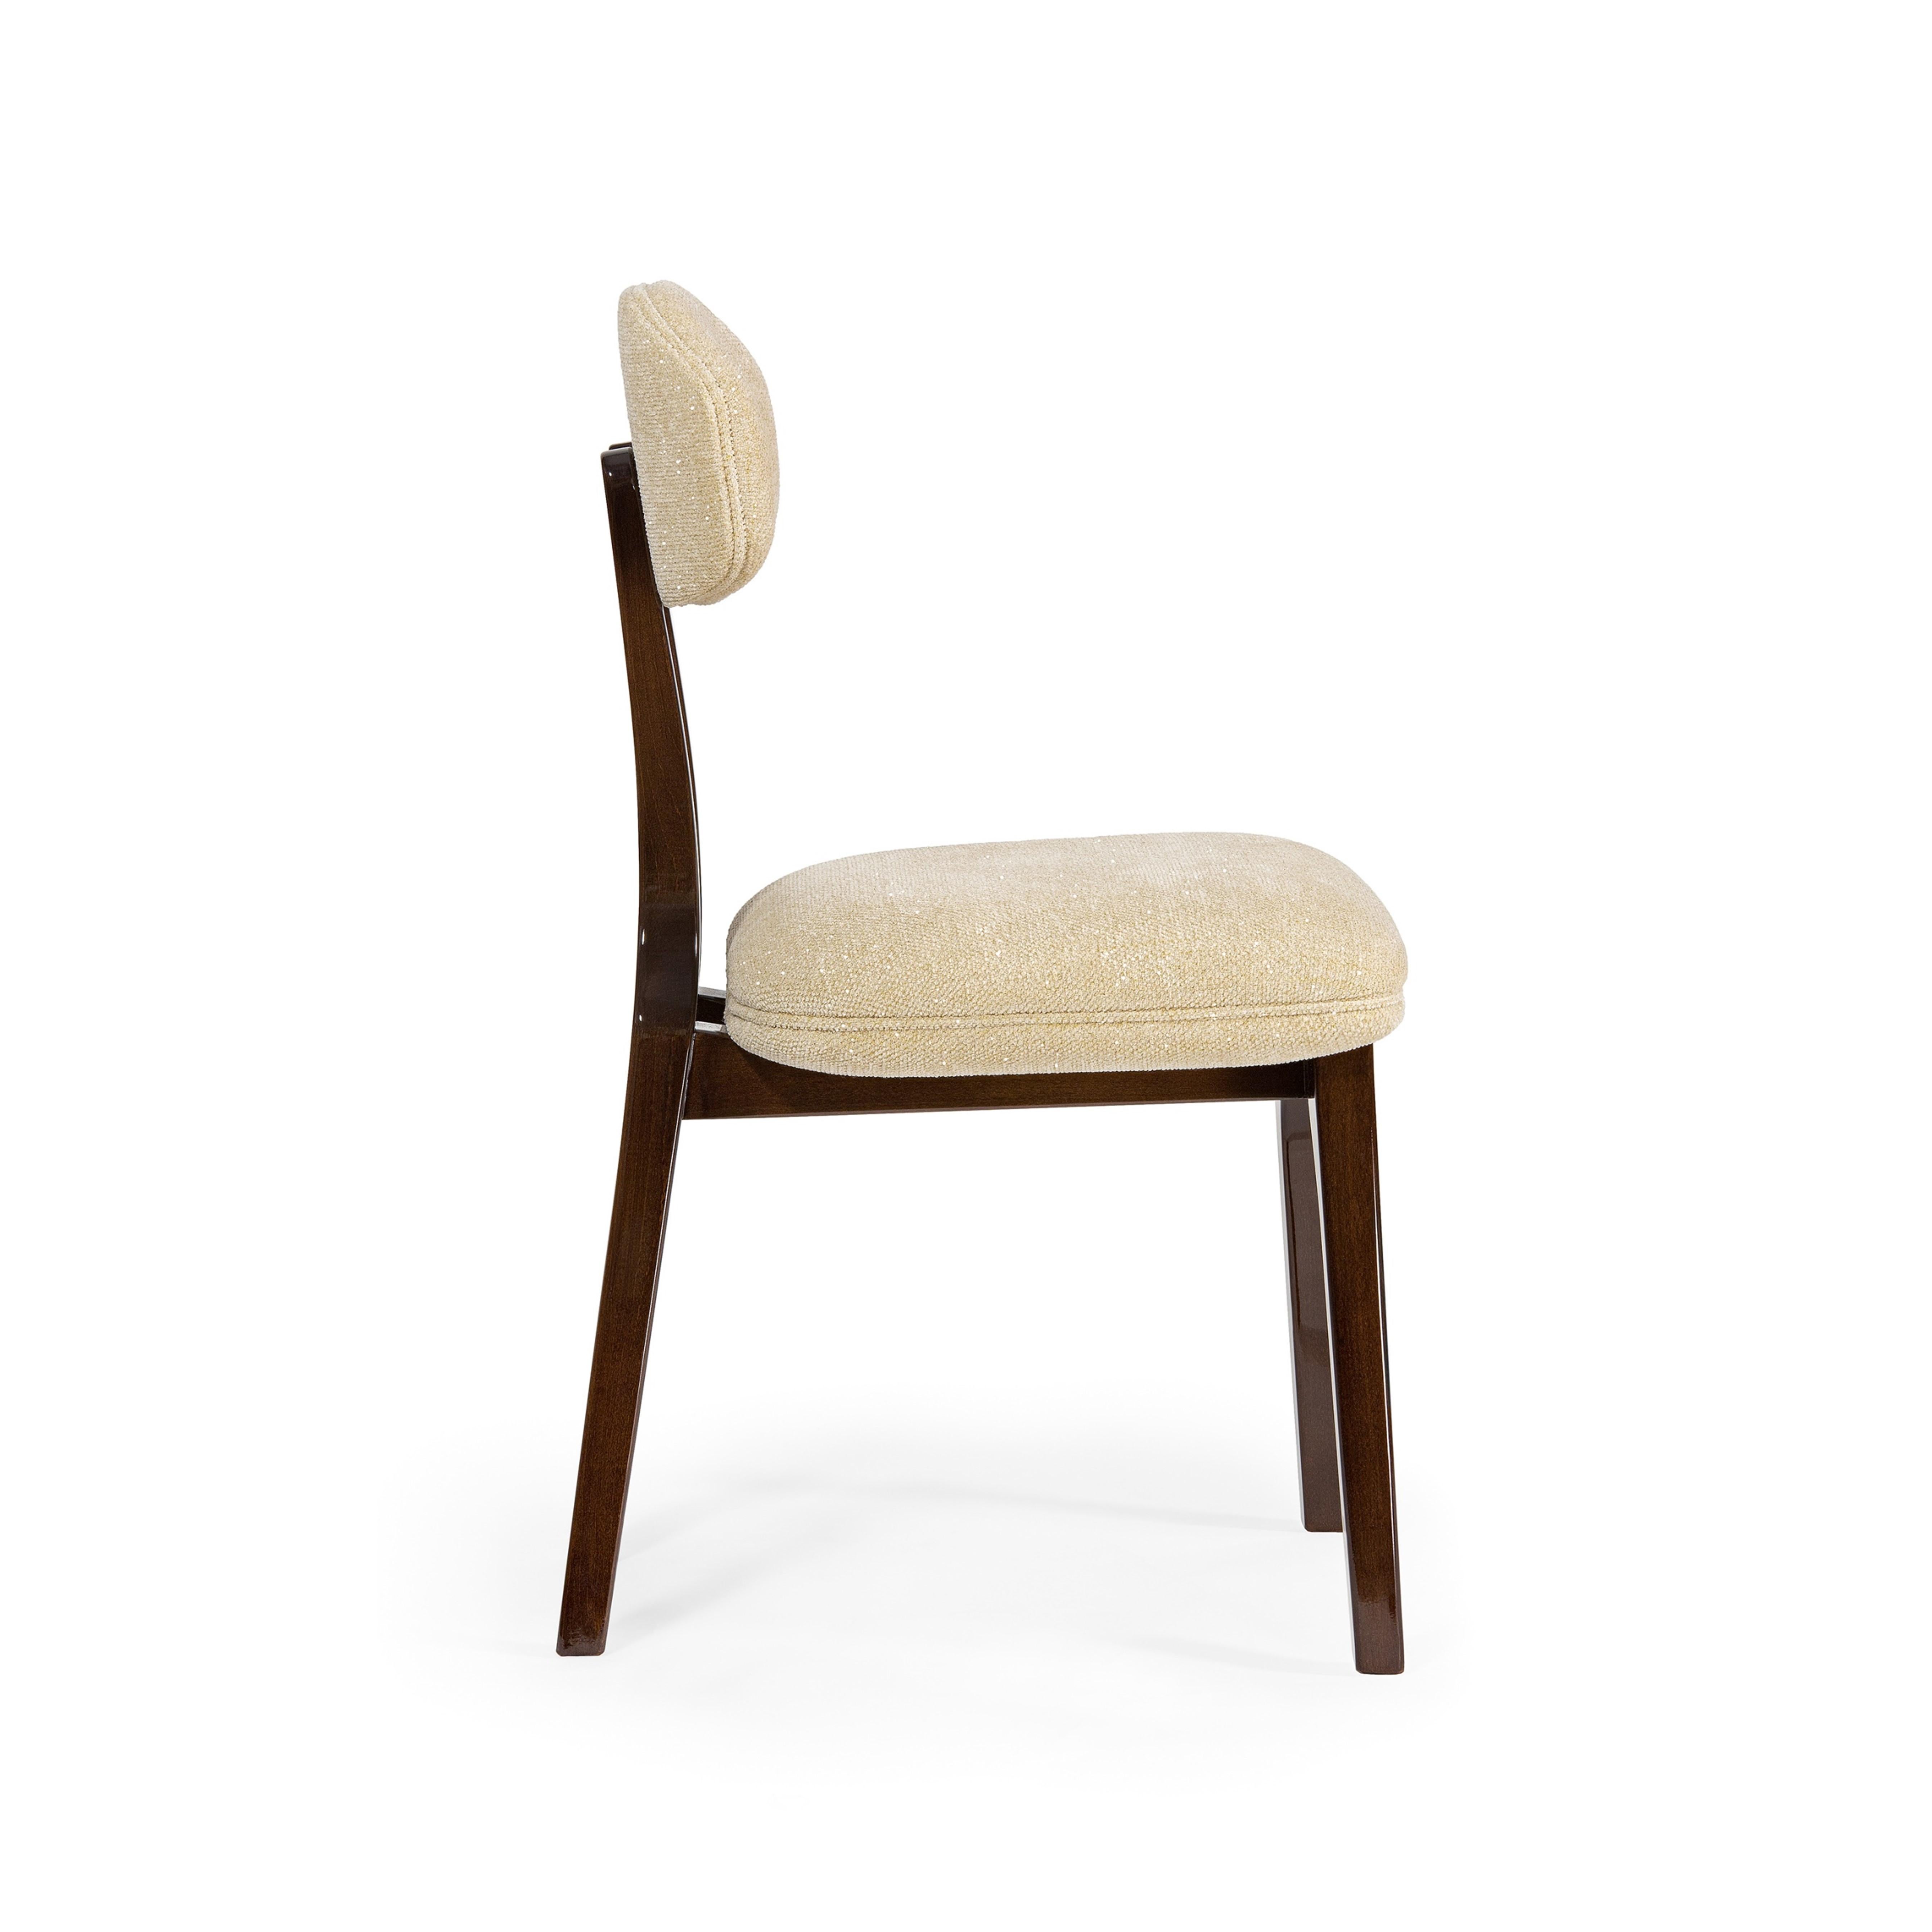 Hand-Crafted Silhouette Dining Chair, Wood & COM, Insidherland by Joana Santos Barbosa For Sale